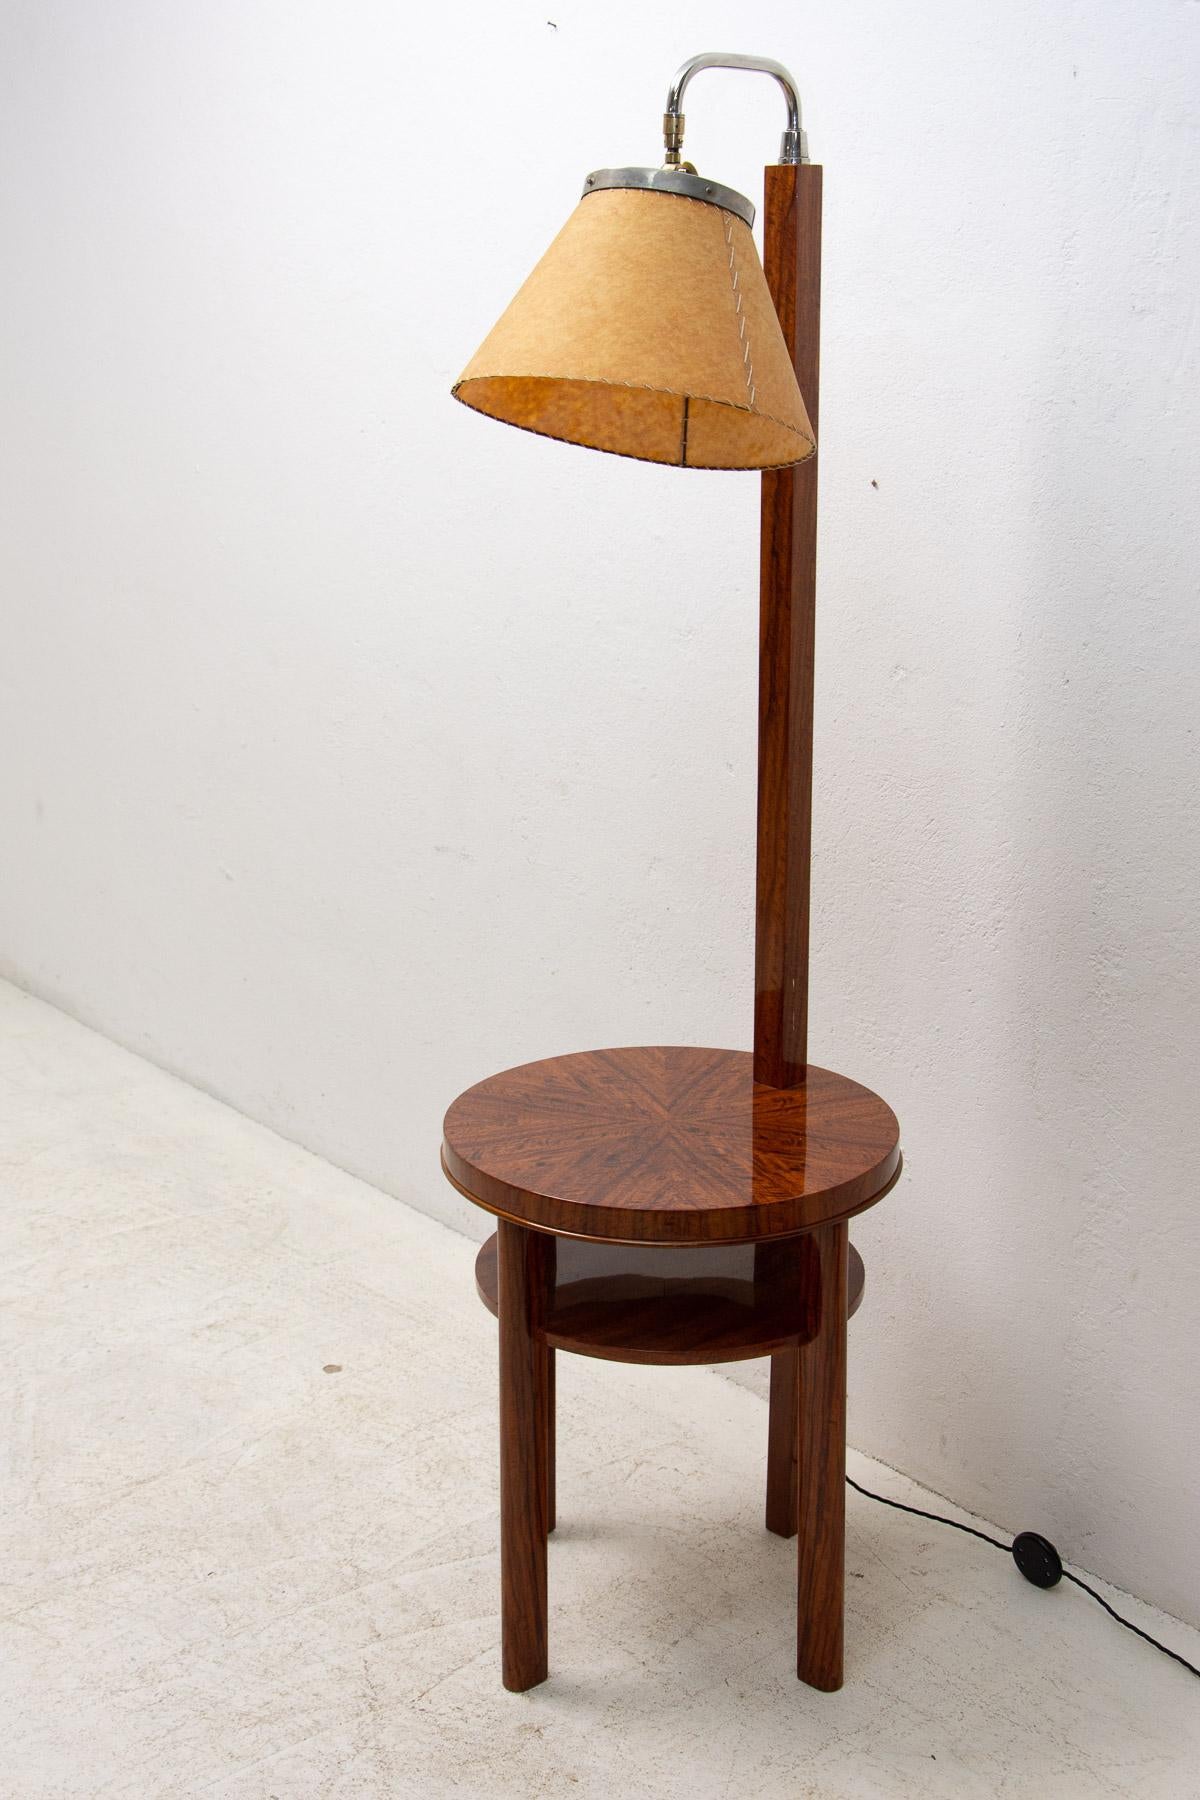 This beautiful floor lamp in the ART DECO style was made in the 1930´s in the former Czechoslovakia.

The Structure of the lamp is made of chrome and walnut.

It has a plastic shade. Can also be used as a side table. Completely renovated, new